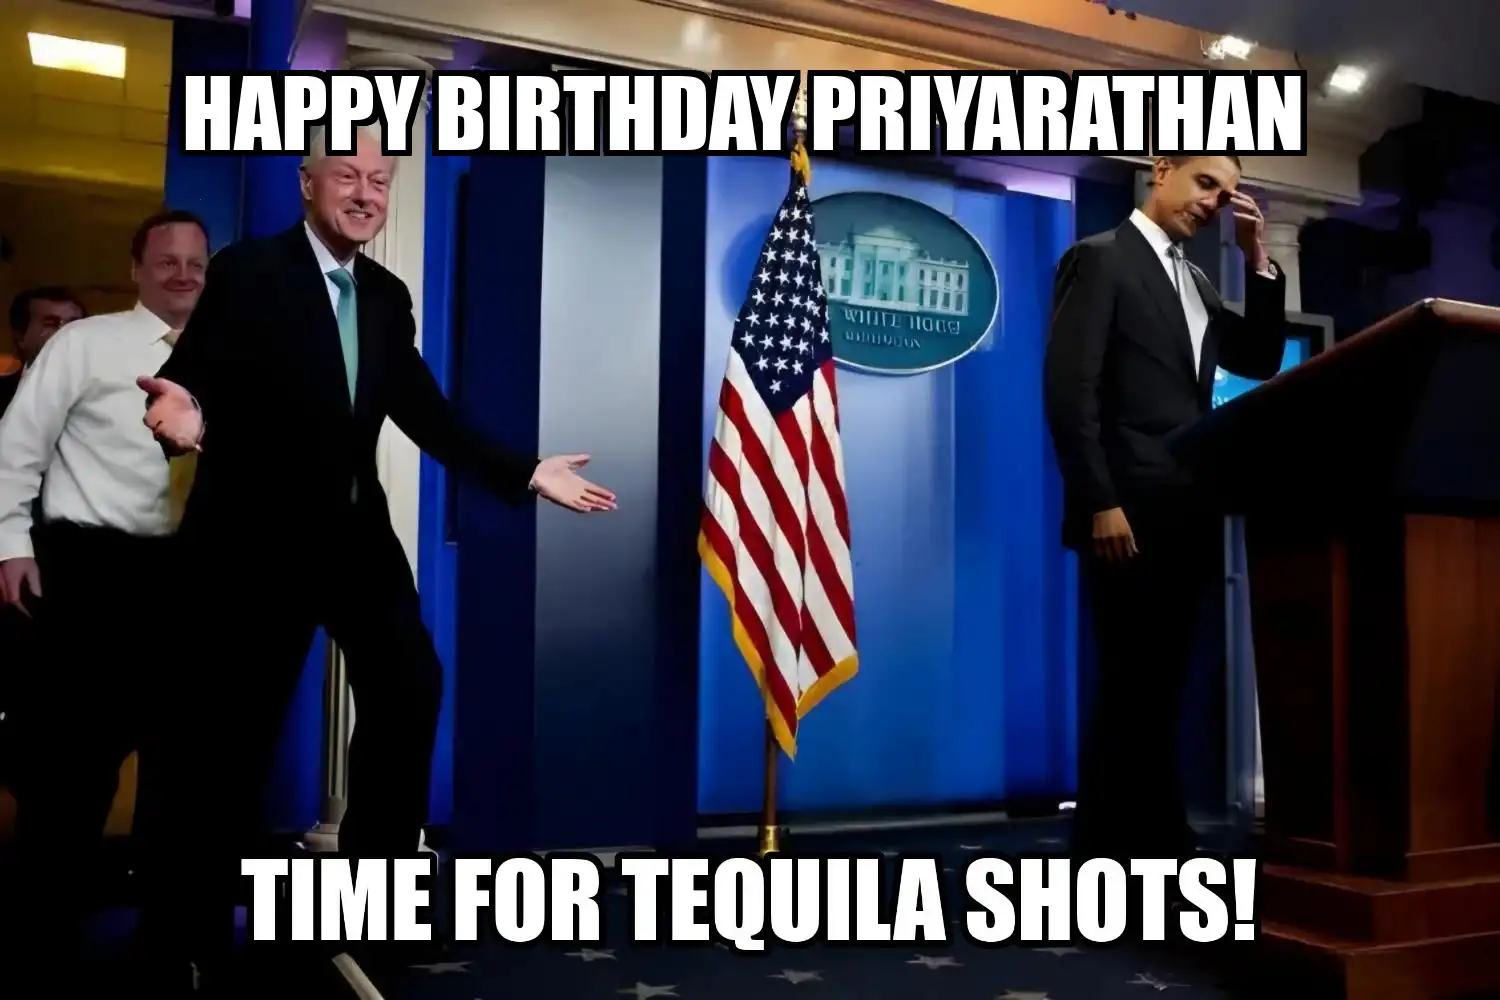 Happy Birthday Priyarathan Time For Tequila Shots Memes